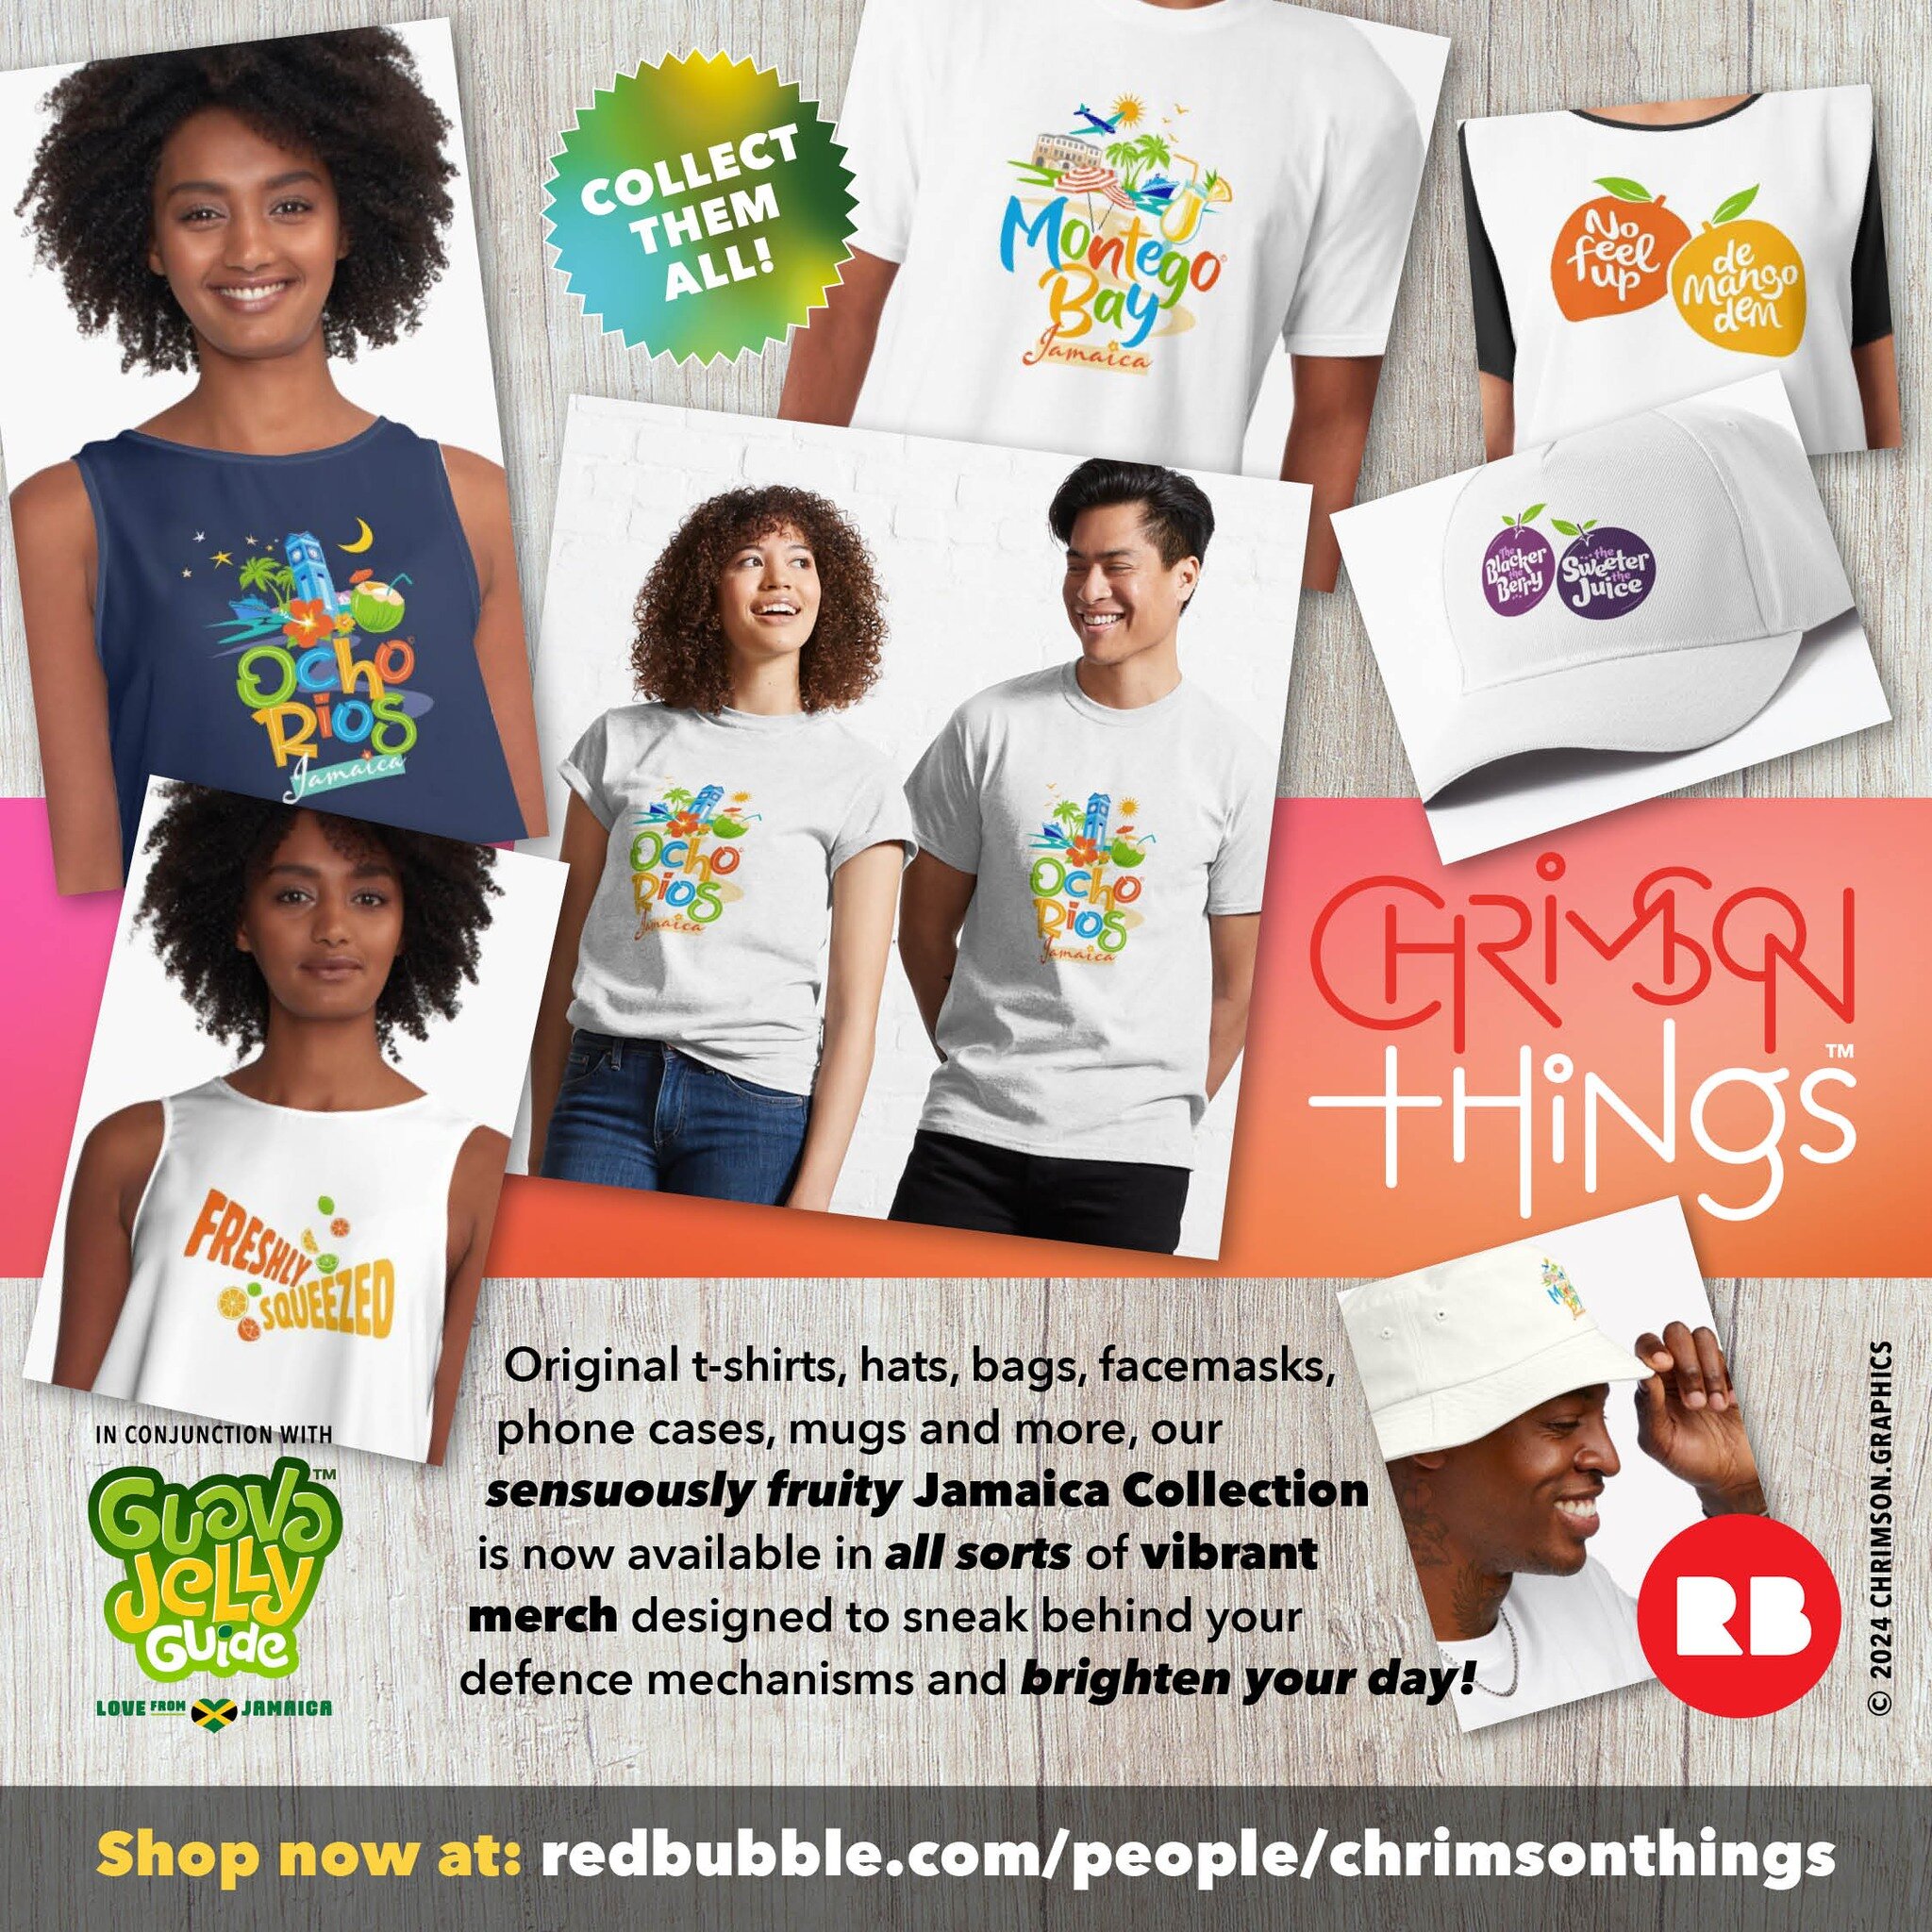 Original t-shirts, hats, bags, facemasks, phone cases, mugs and more, our sensuously fruity Jamaica Collection is now available in all sorts of vibrant
merch designed to sneak behind your defence mechanisms and brighten your day!

https://www.redbubb